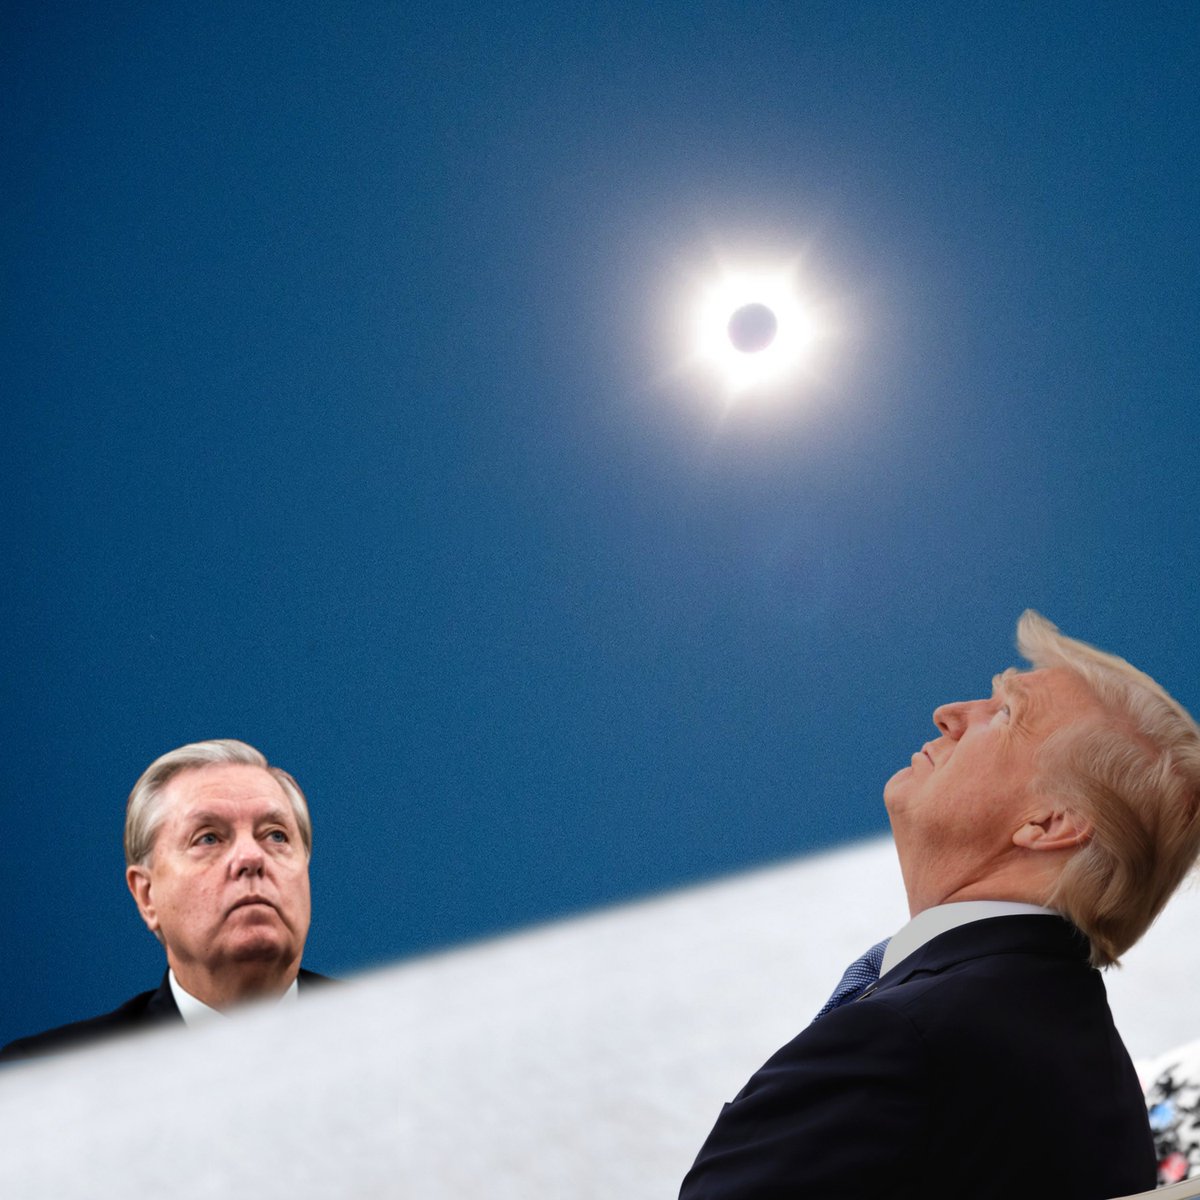 @NotHoodlum Graham... kicked to the curb once no longer needed. Again. He never learned the first time around. Never follow someone who stares at the eclipse with their naked eyes. #TrumpIsCompromised #TrumpIsATraitorAndCriminal #TrumpCrimeFamily